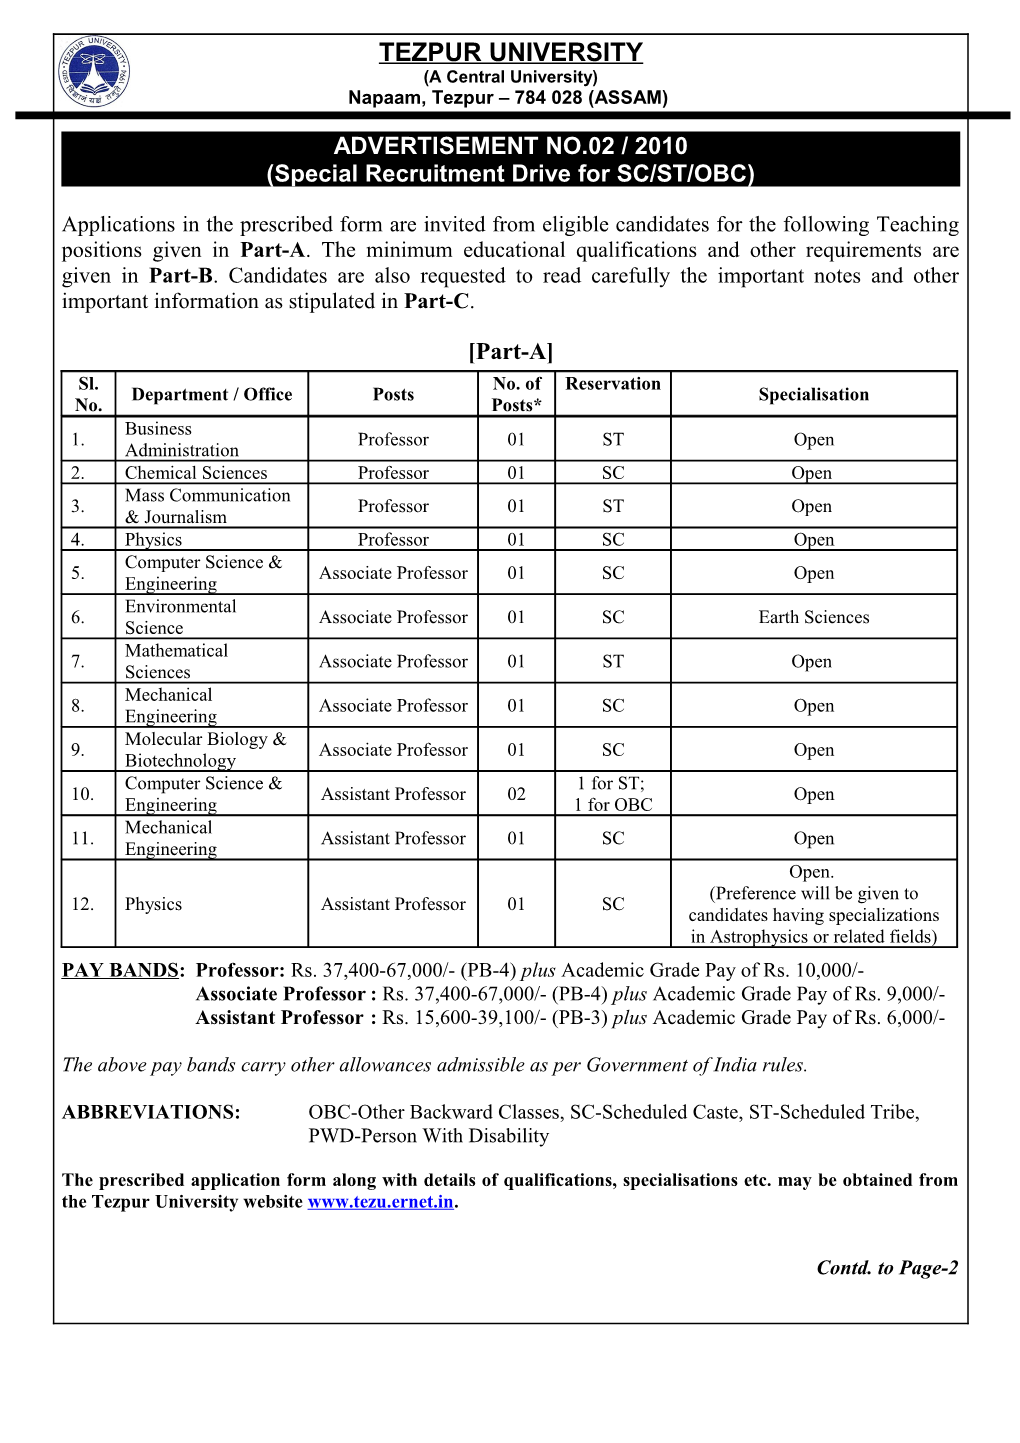 Special Recruitment Drive for SC/ST/OBC